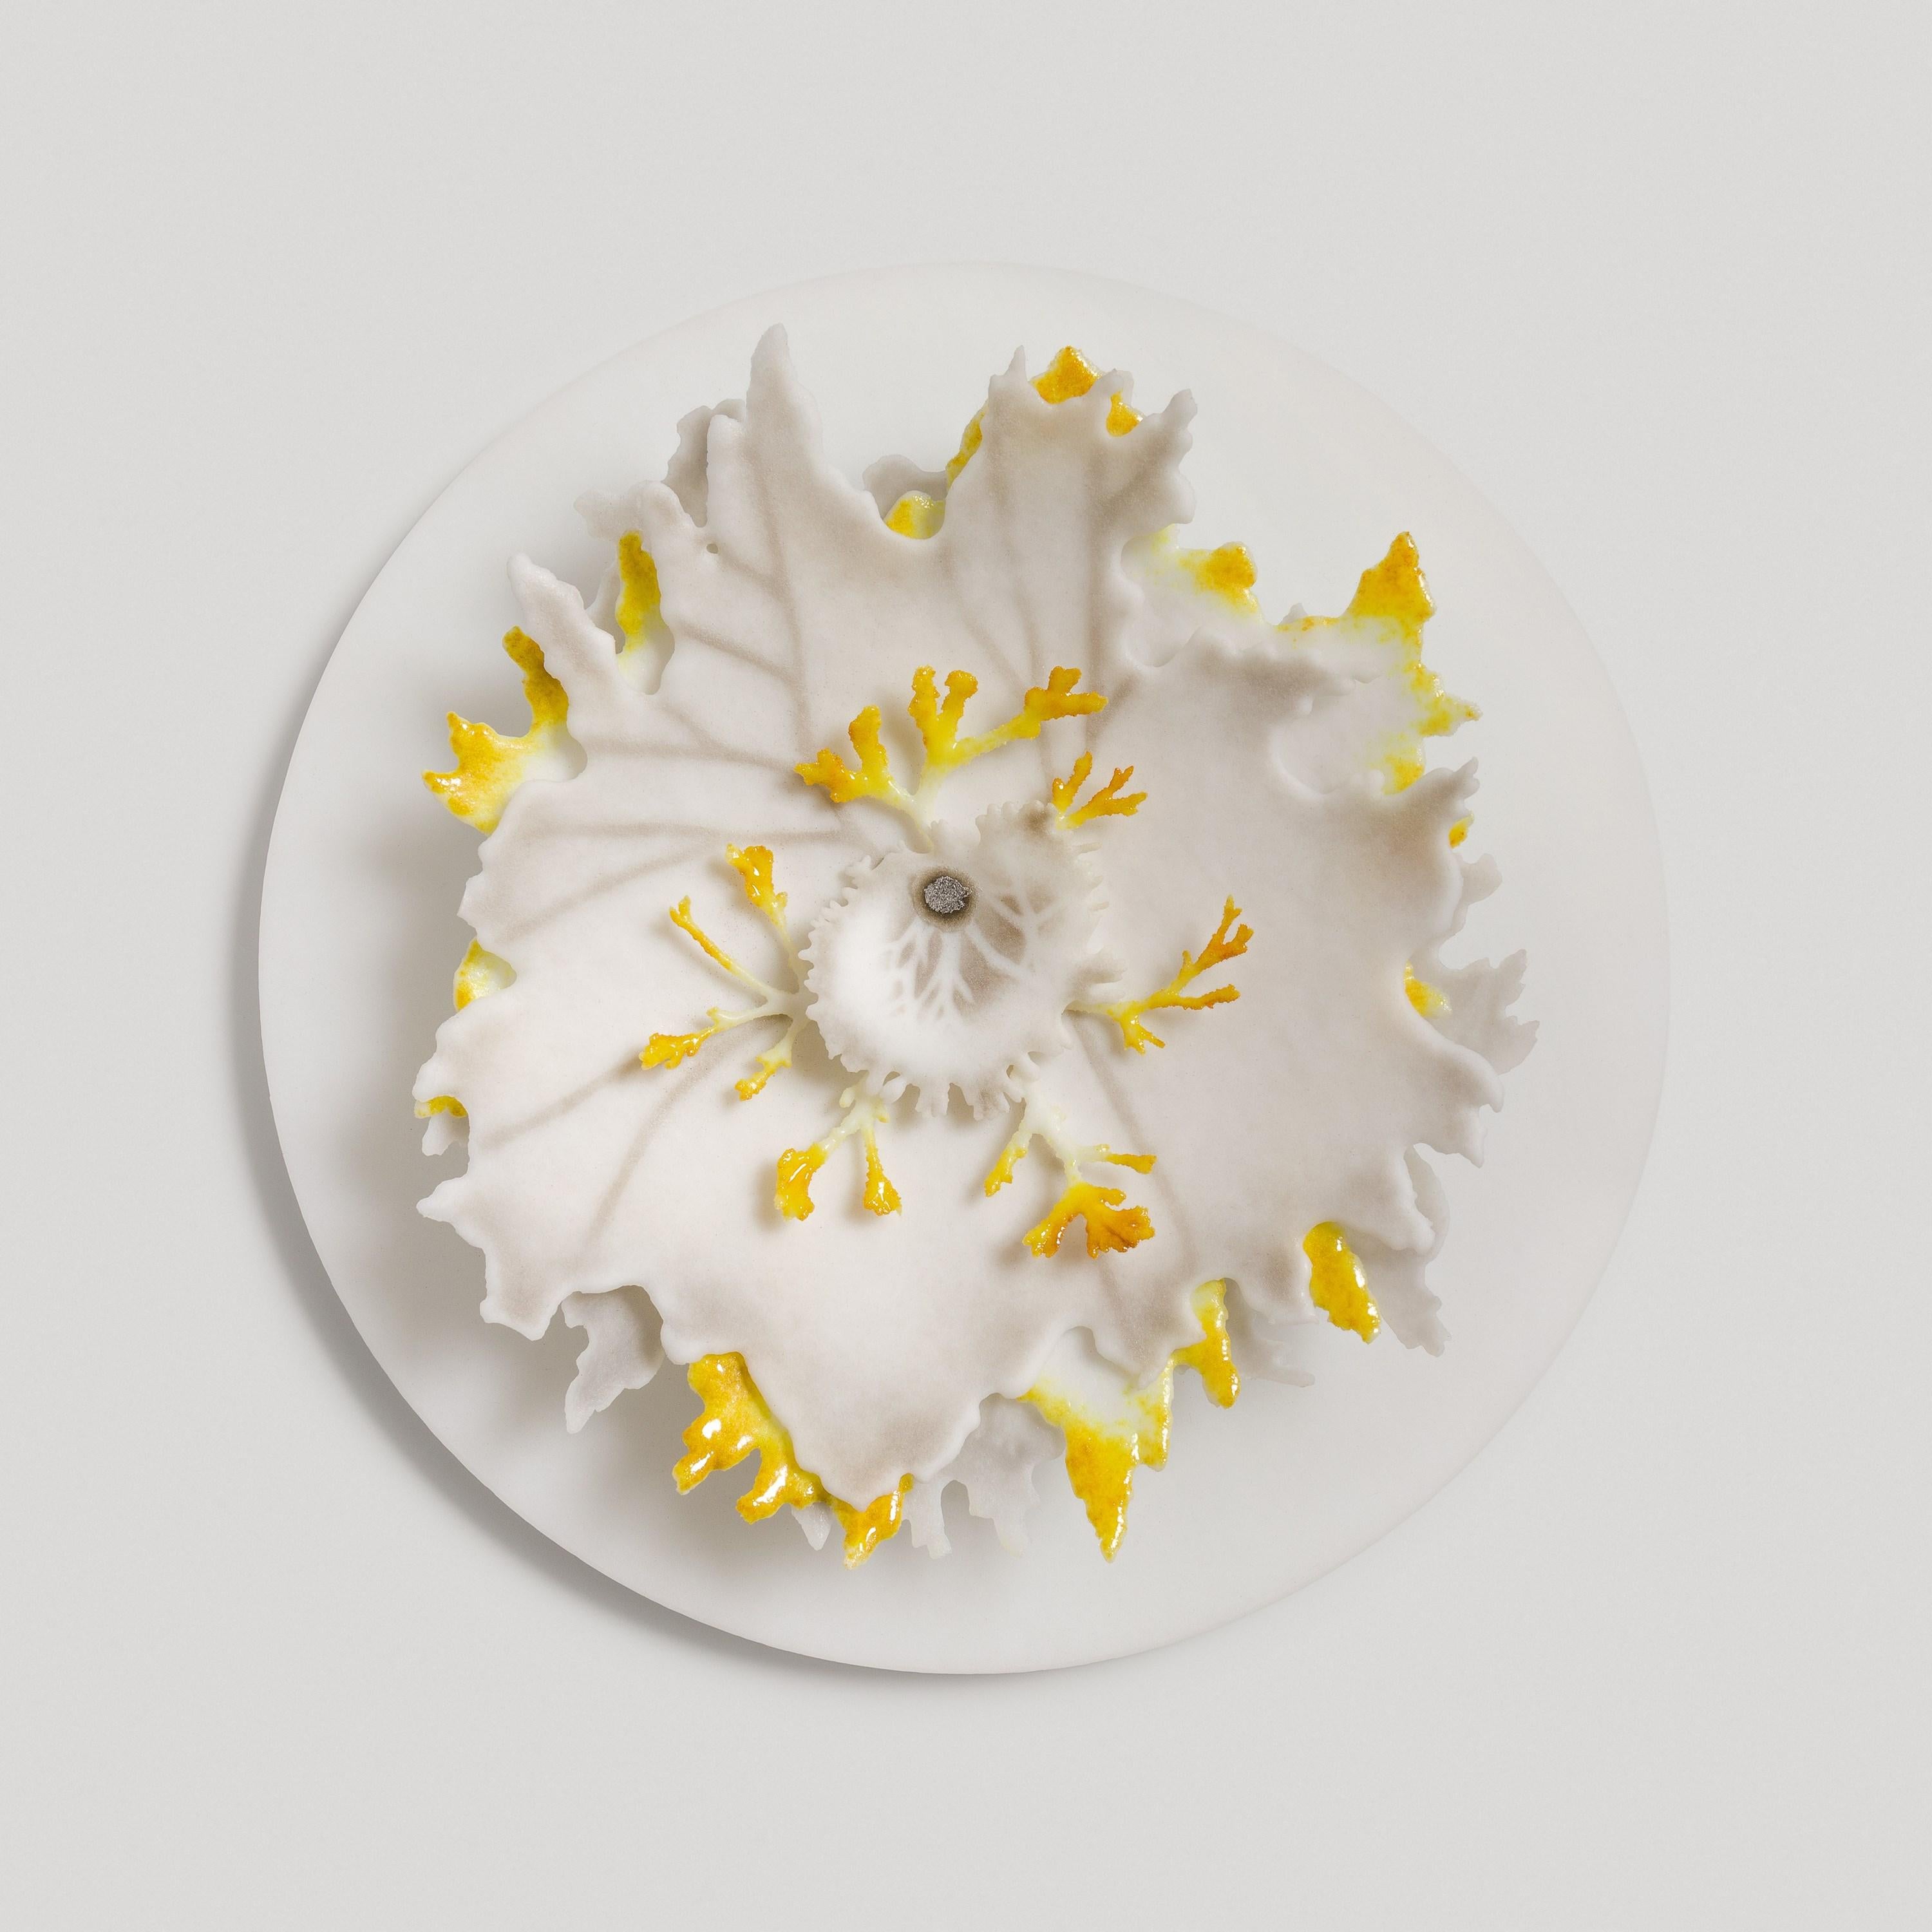 Organic Modern Lichen Studies 'I to IV' a Grey & Yellow Glass Installation by Verity Pulford For Sale